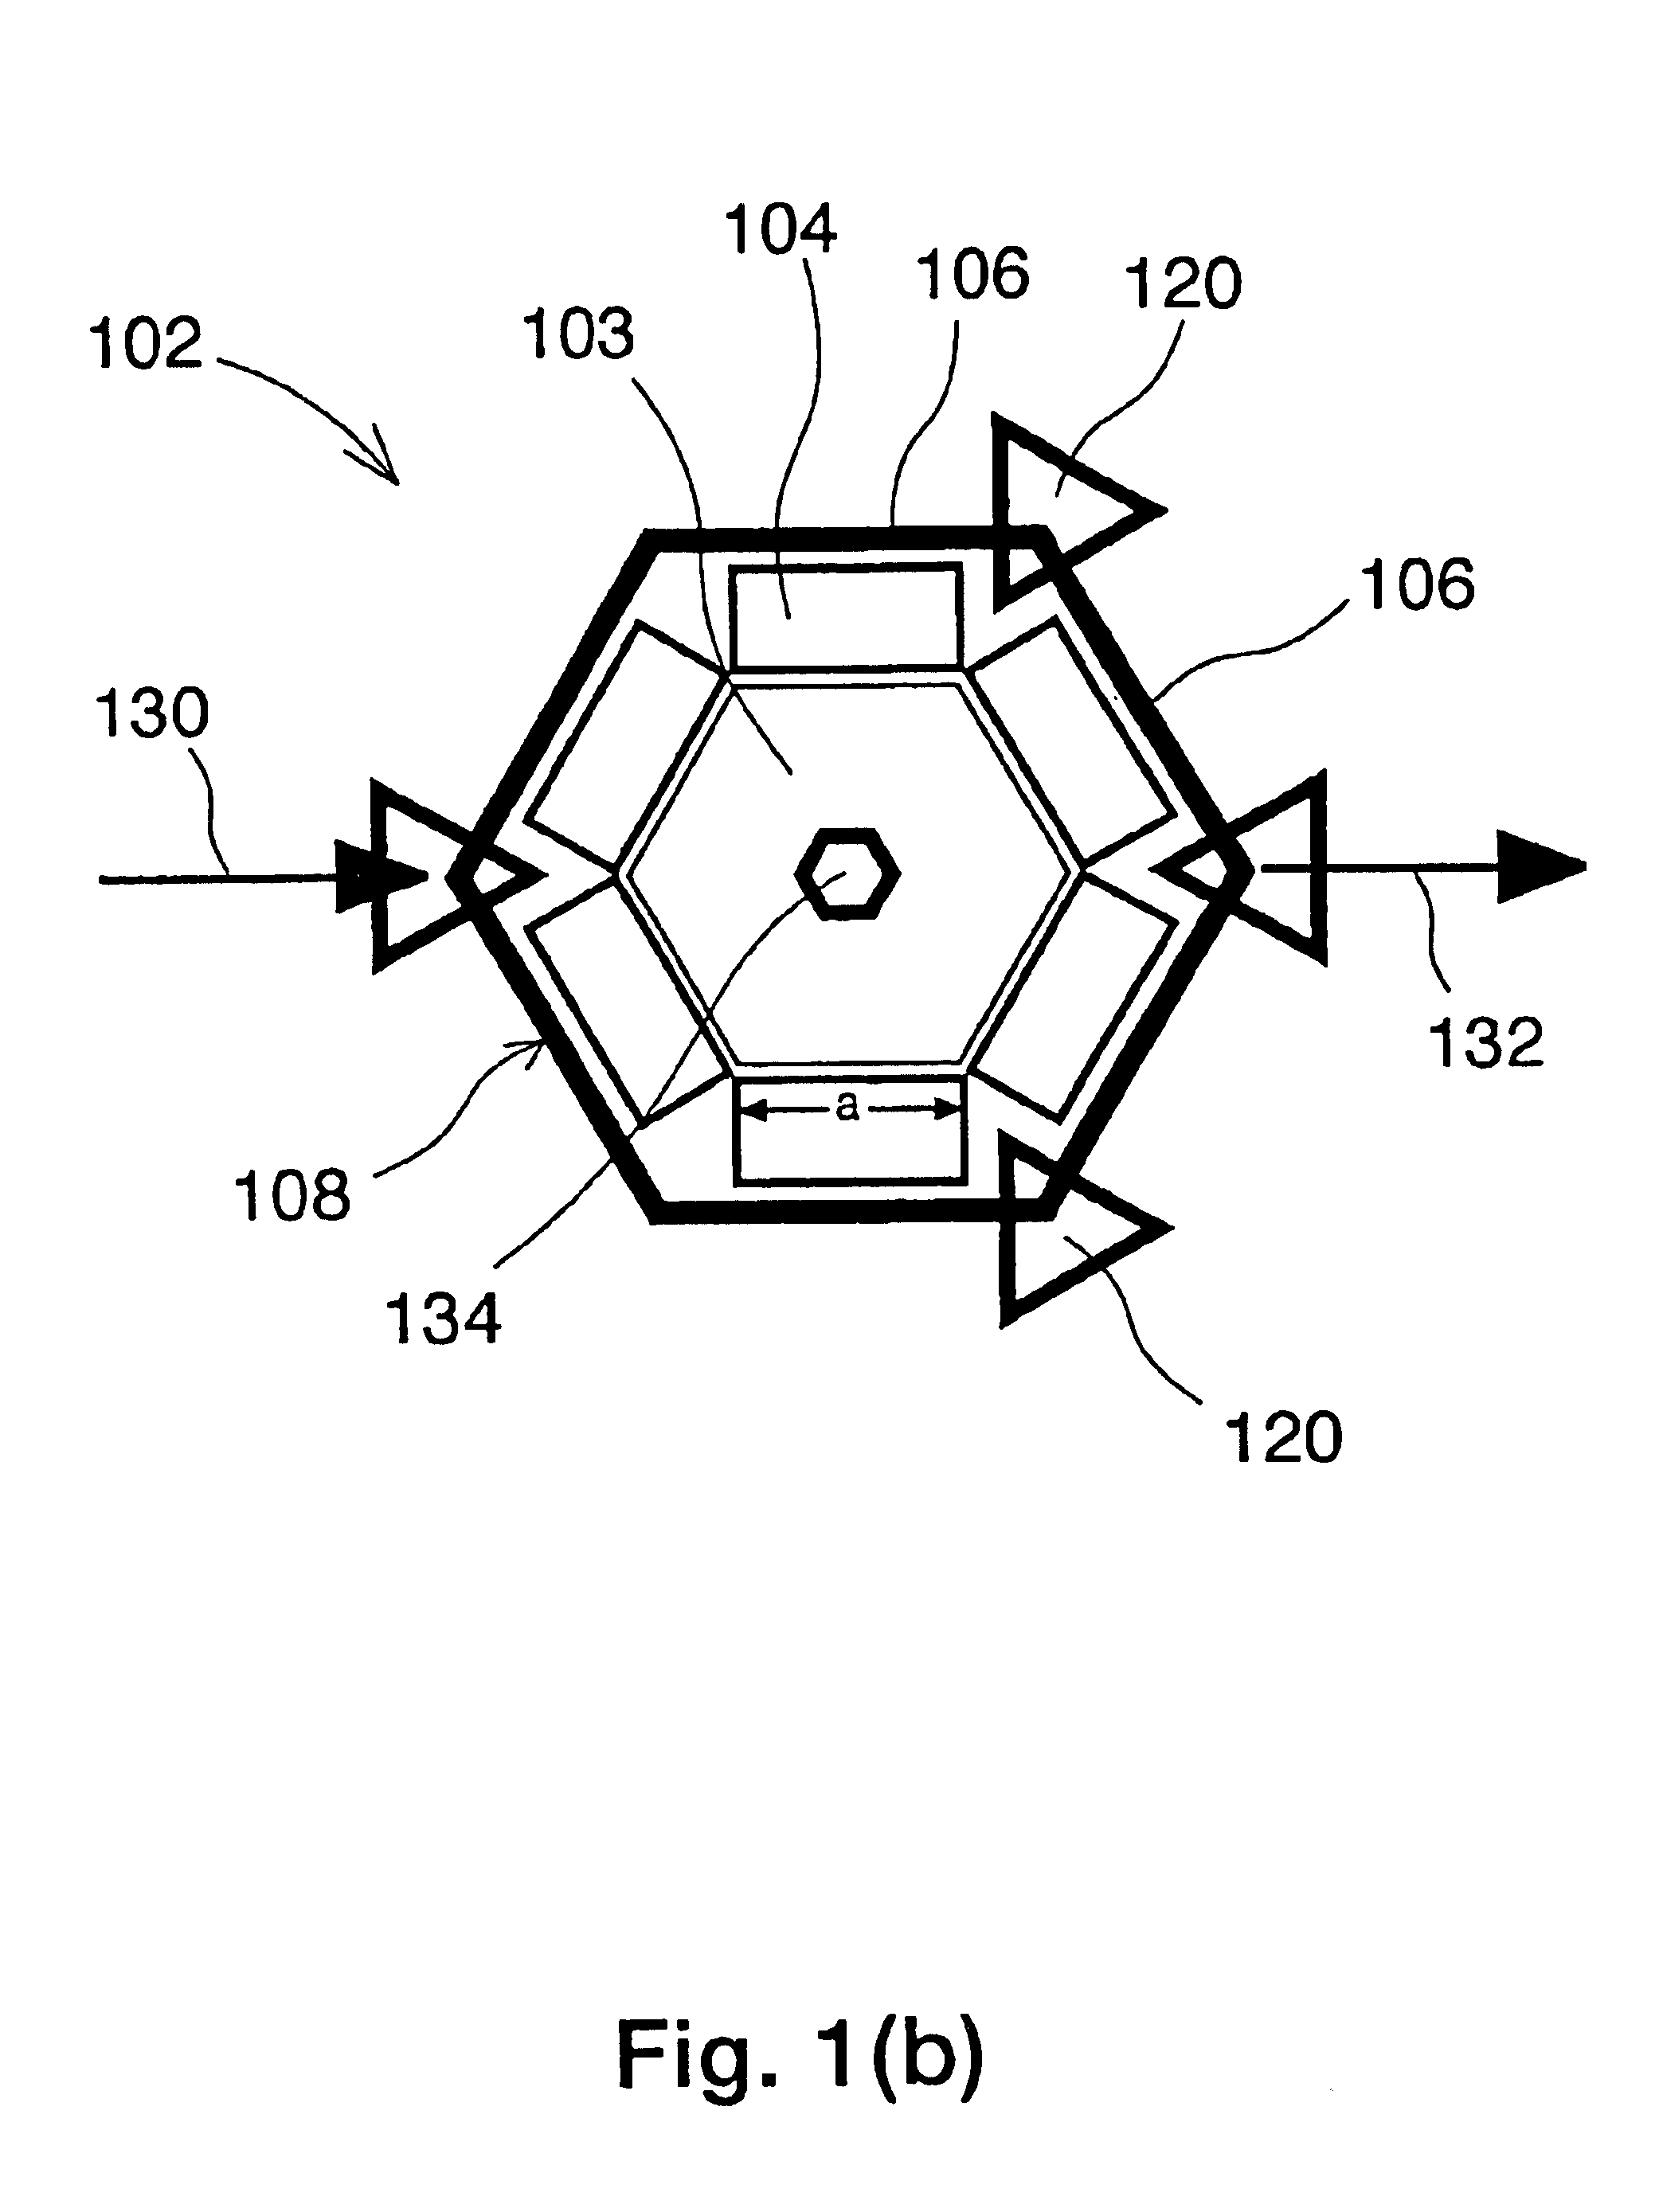 Integrated reconfigurable manufacturing system